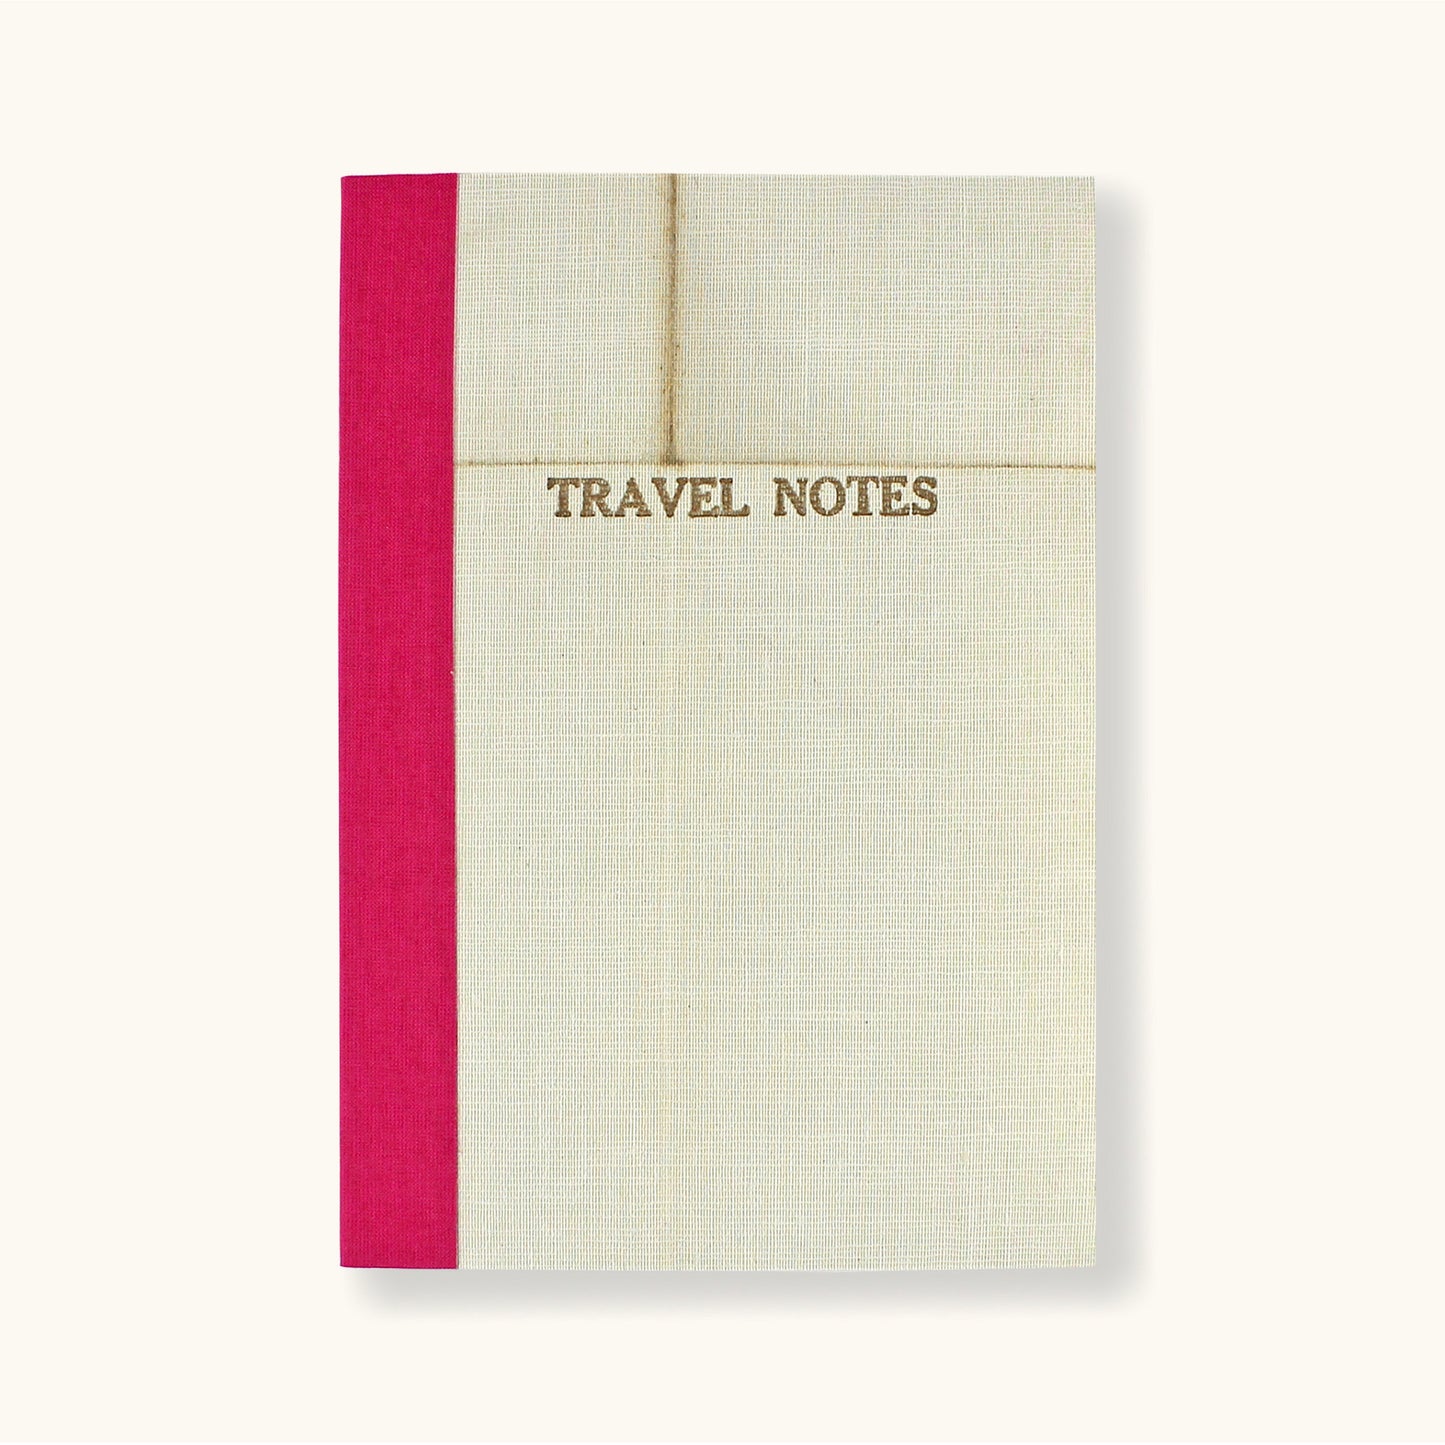 Linen Map Travel Notes With Pink Binding - Sukie